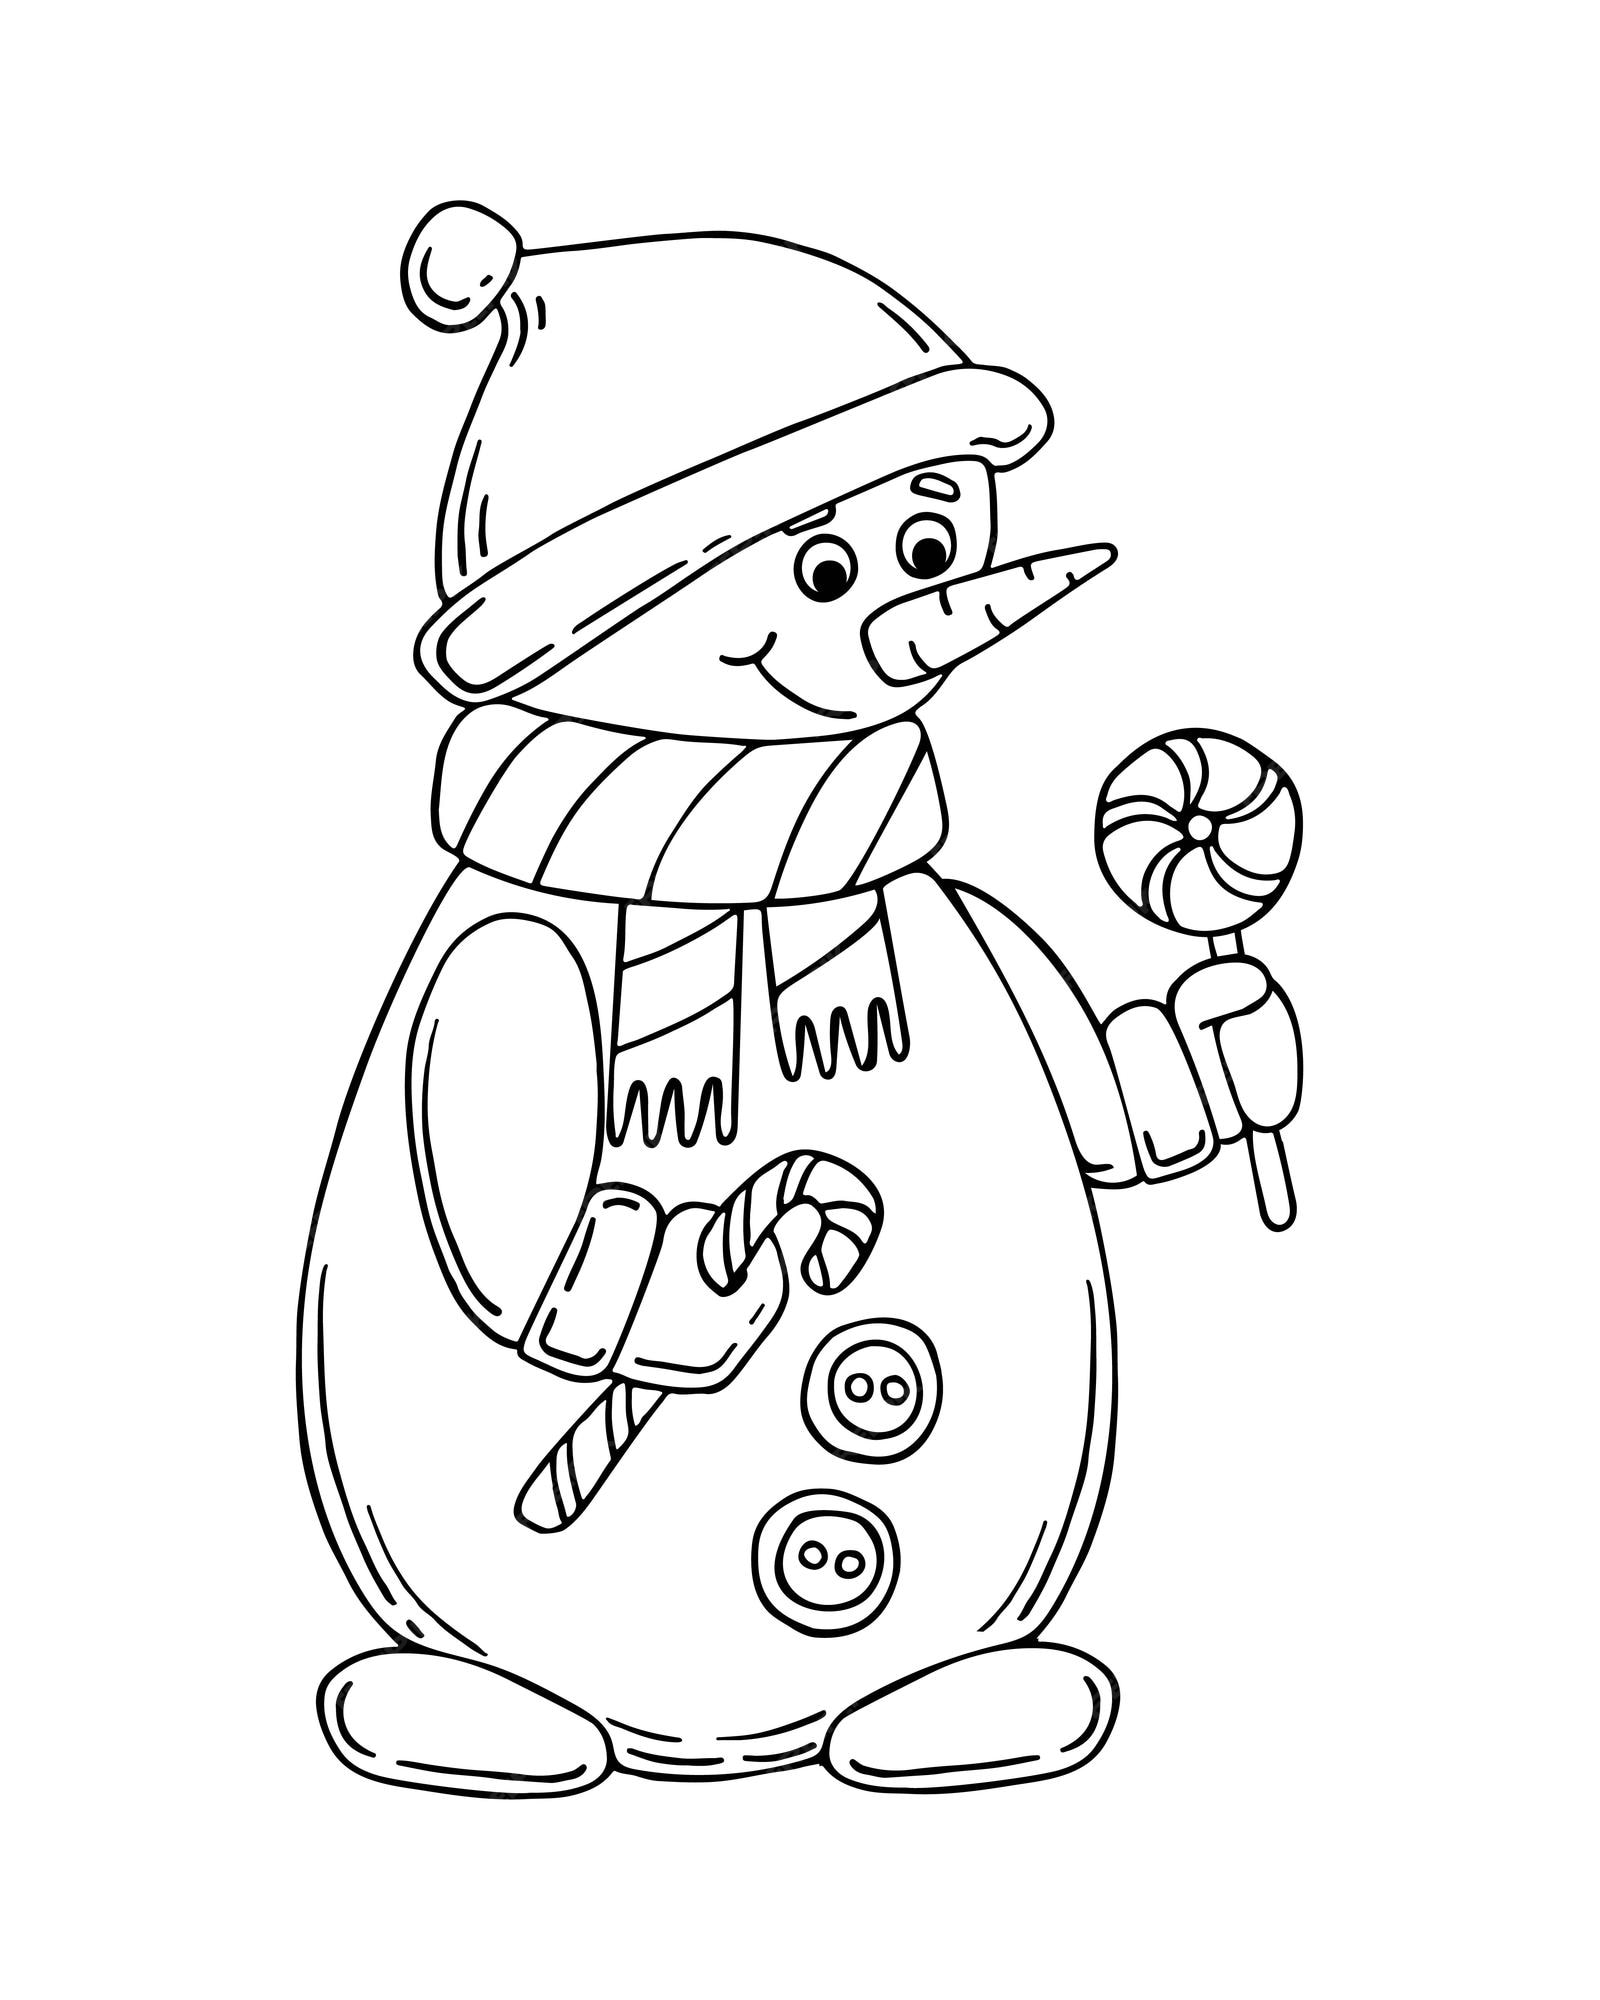 Premium vector coloring book snowman line art cute winter character in hat with lollipops hand drawn vector black and white illustration